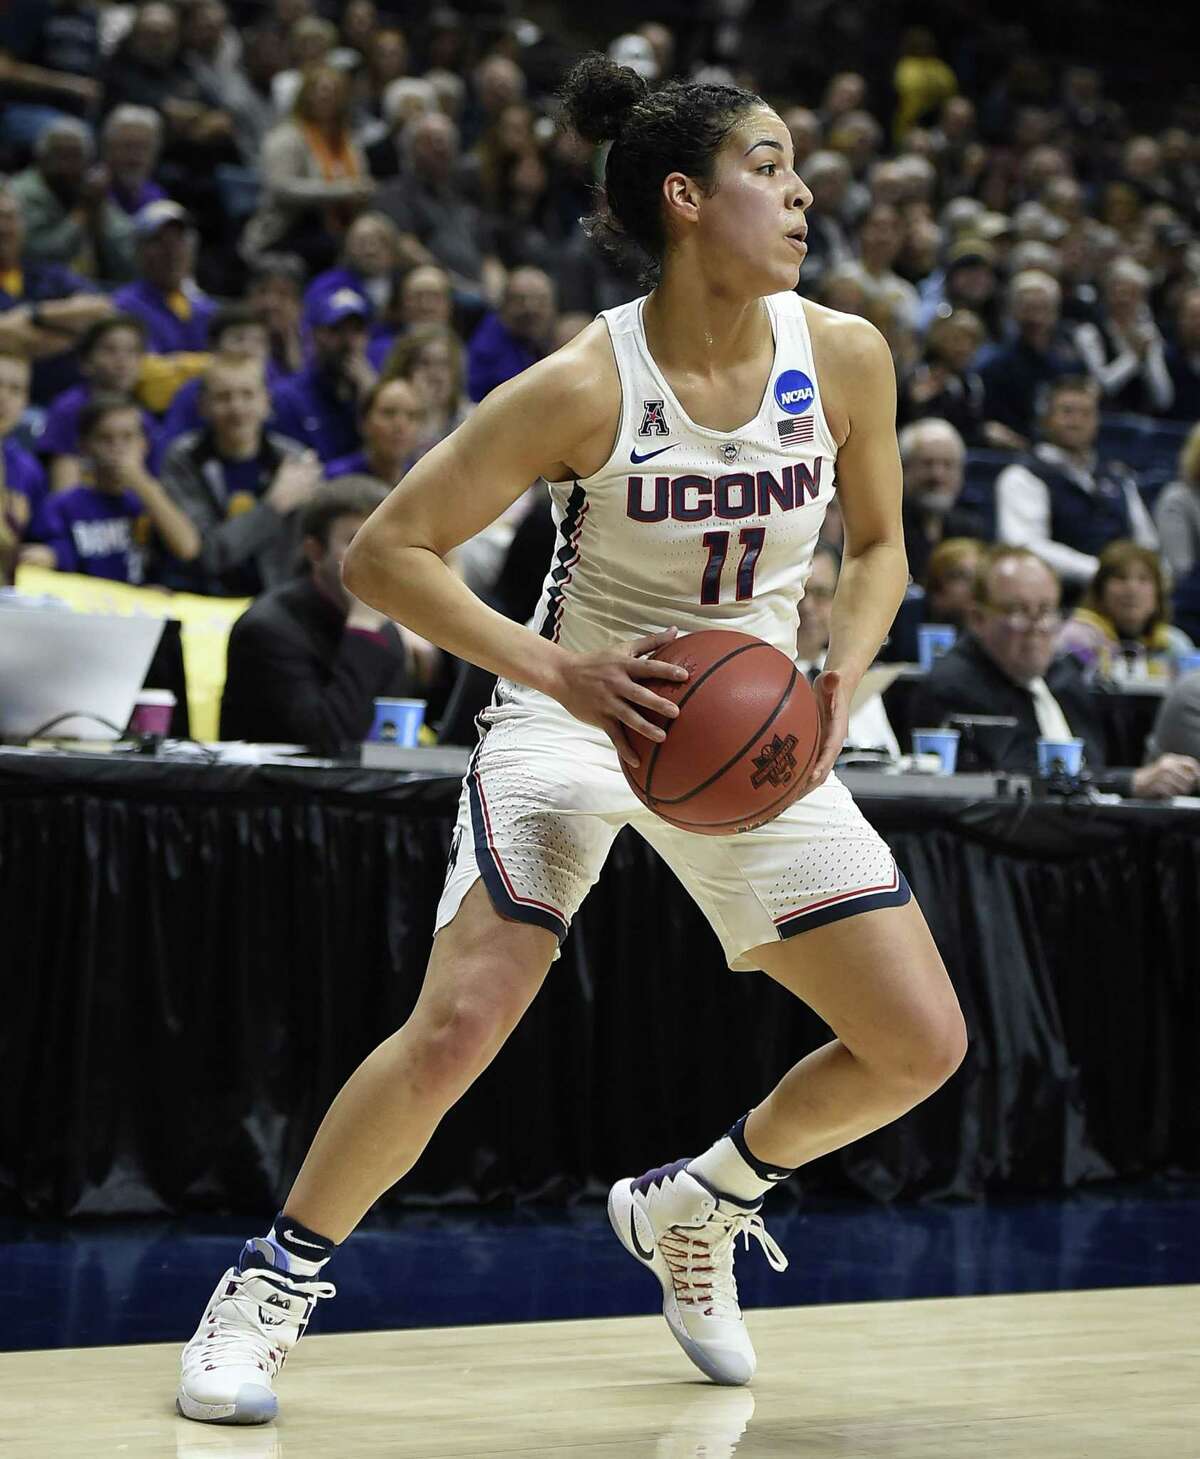 UConn’s Kia Nurse looks to pass during the first half Saturday’s NCAA Tournament win over Albany in Storrs.